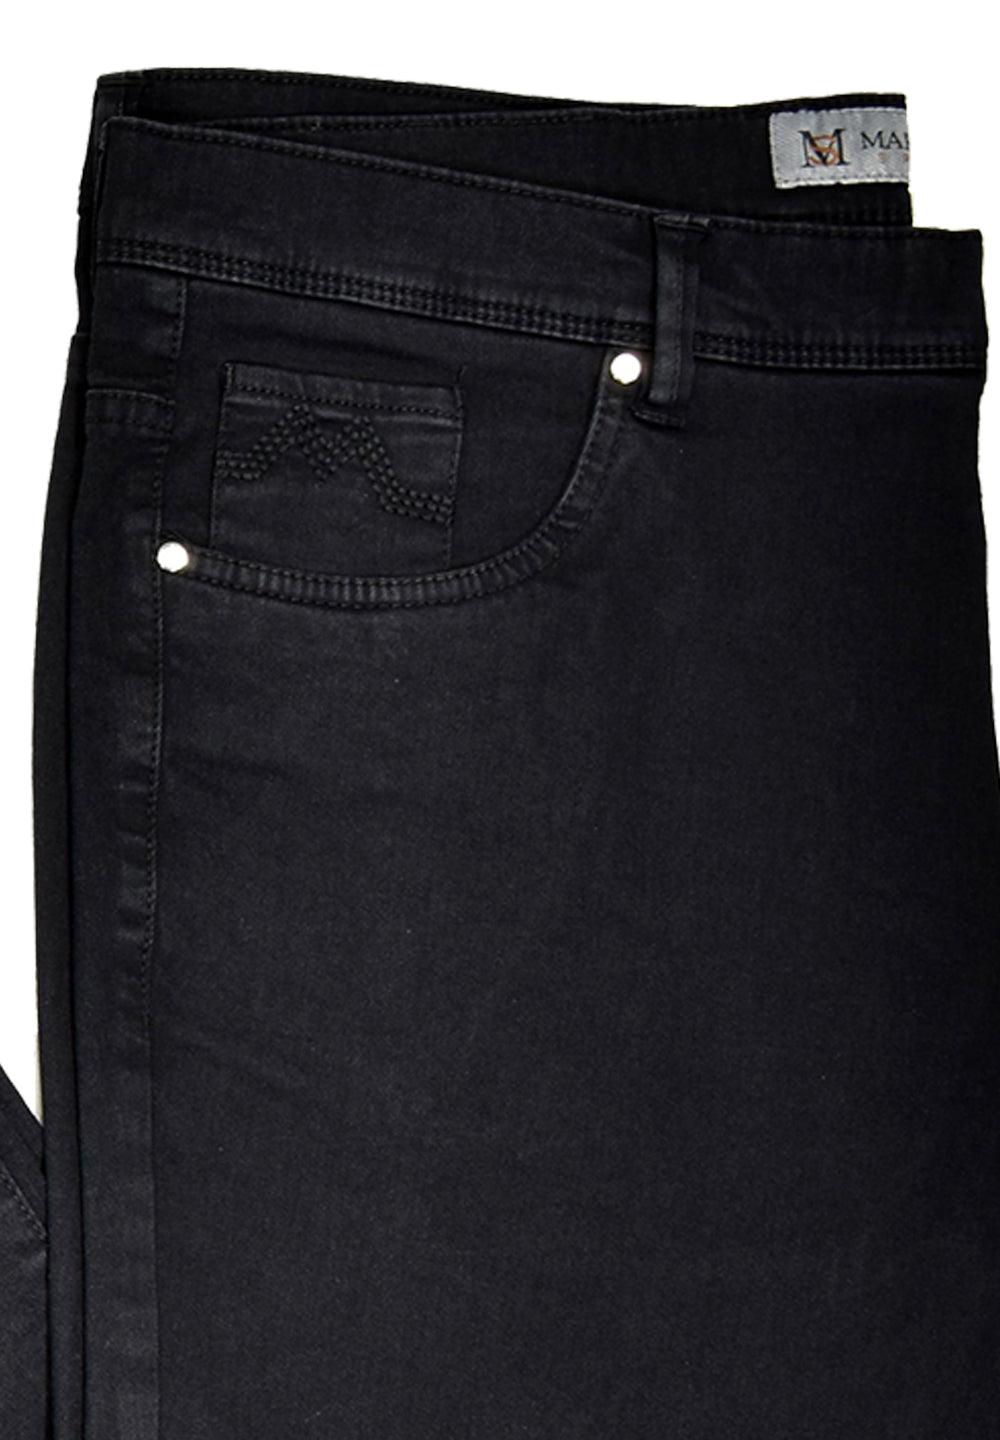 Marcello’s best fitting lightweight washed denim. Feels and looks great! Our comfort fit from the waist band down to the thighs, then tapering the leg to the bottom provides the best of both worlds.  Comfort where you need it and updated fashion sporting a slimmed leg.  Add the benefit of stretch to work with your natural movements and you have found an excellent jean that will become your go to jean of choice.  Marcello Sport Mens Black Jeans